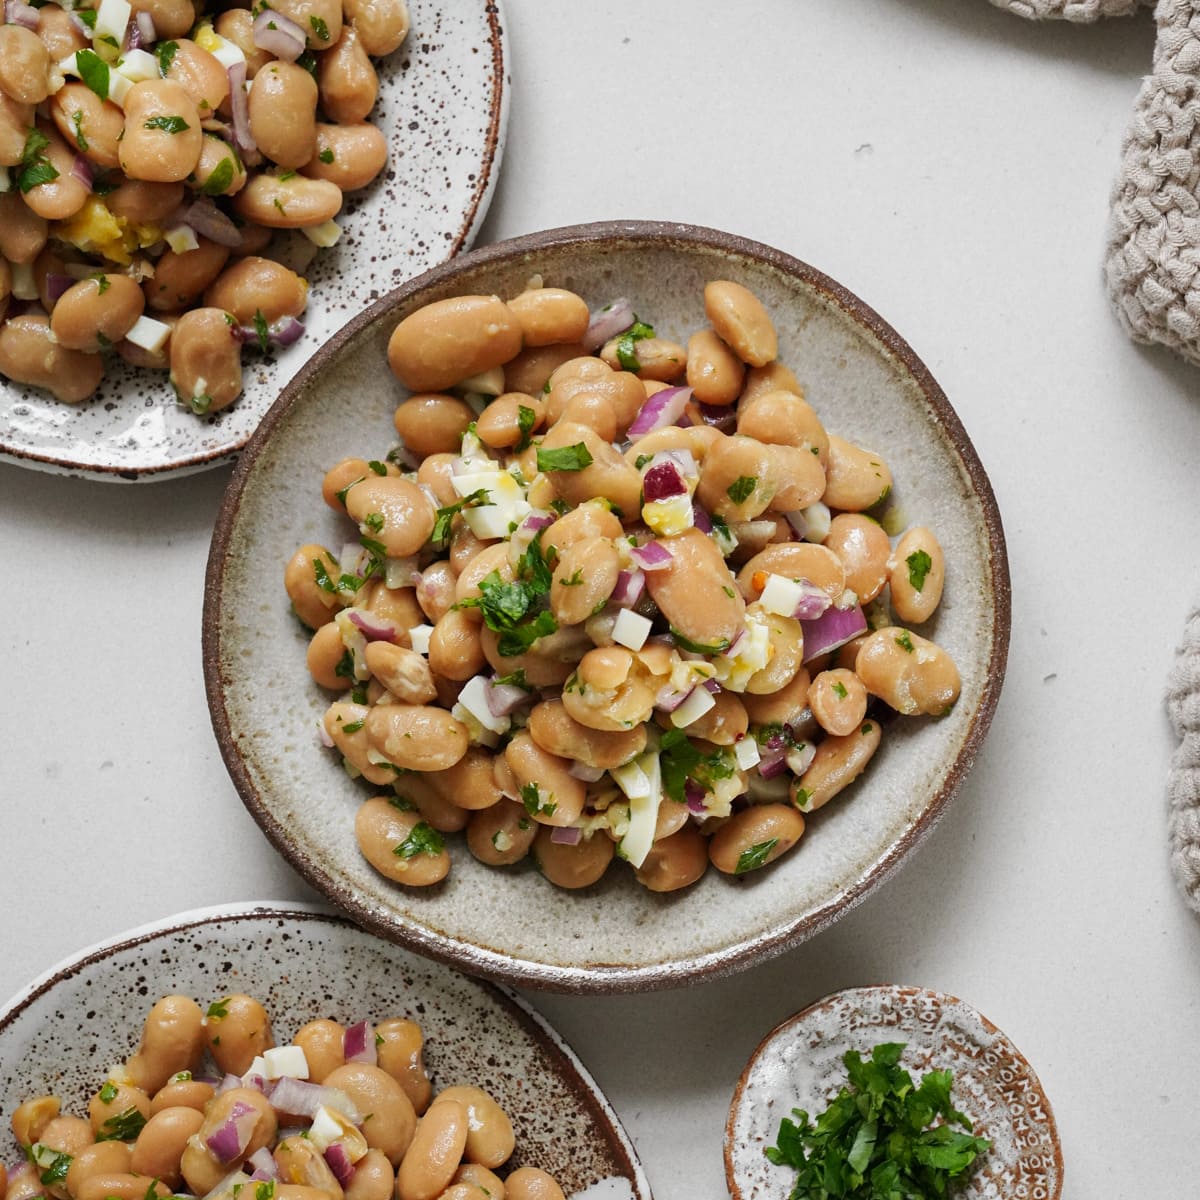 Butter beans recipe on a plate